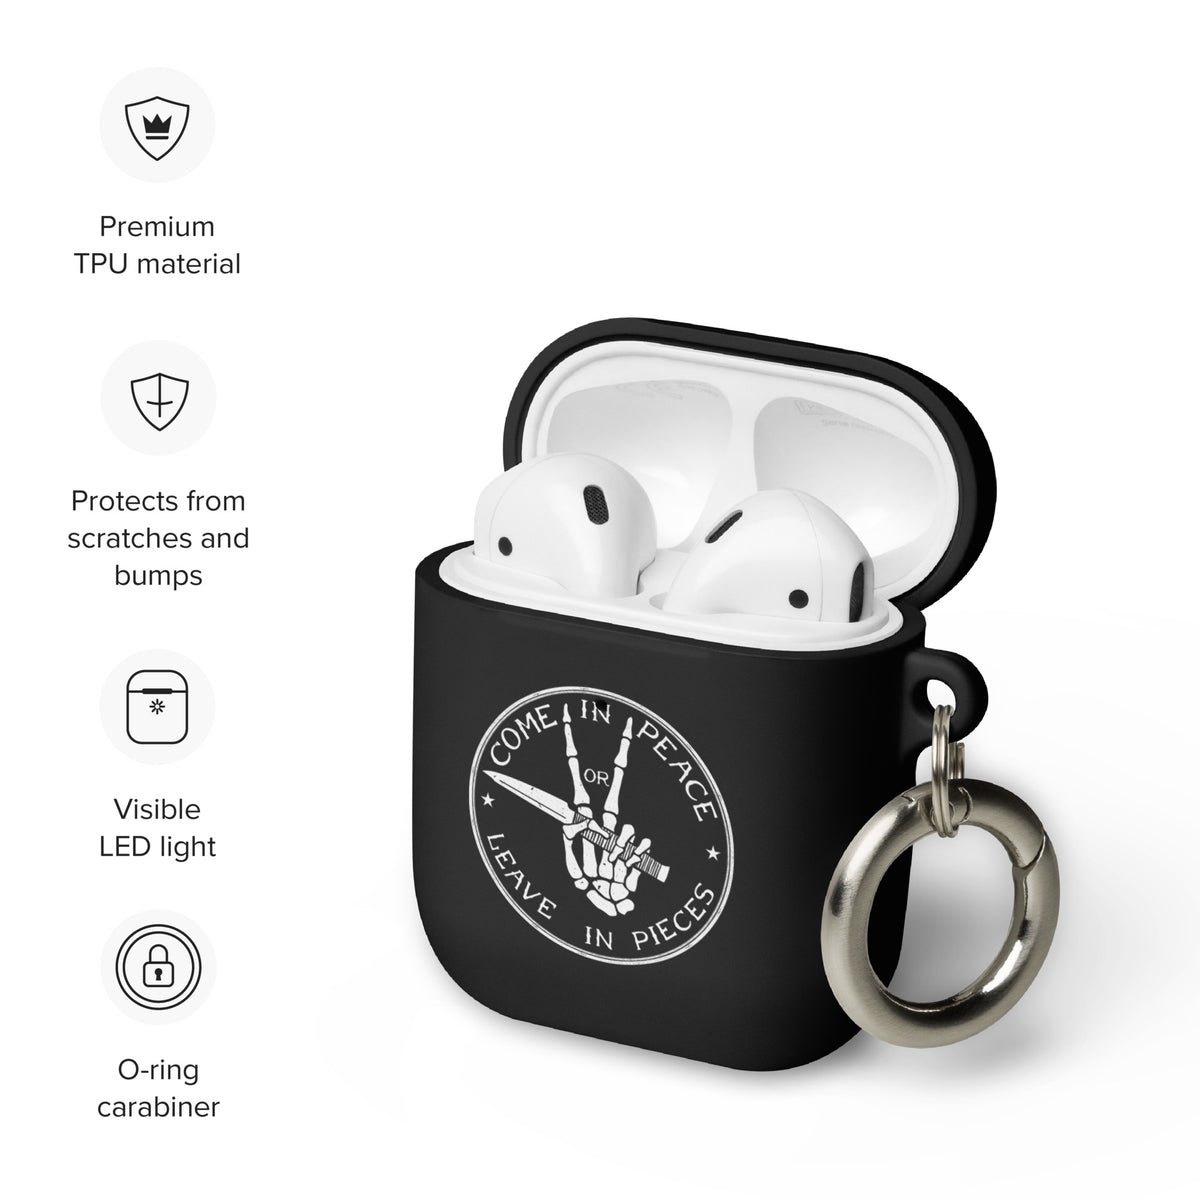 Come in Peace or Leave in Pieces AirPods case